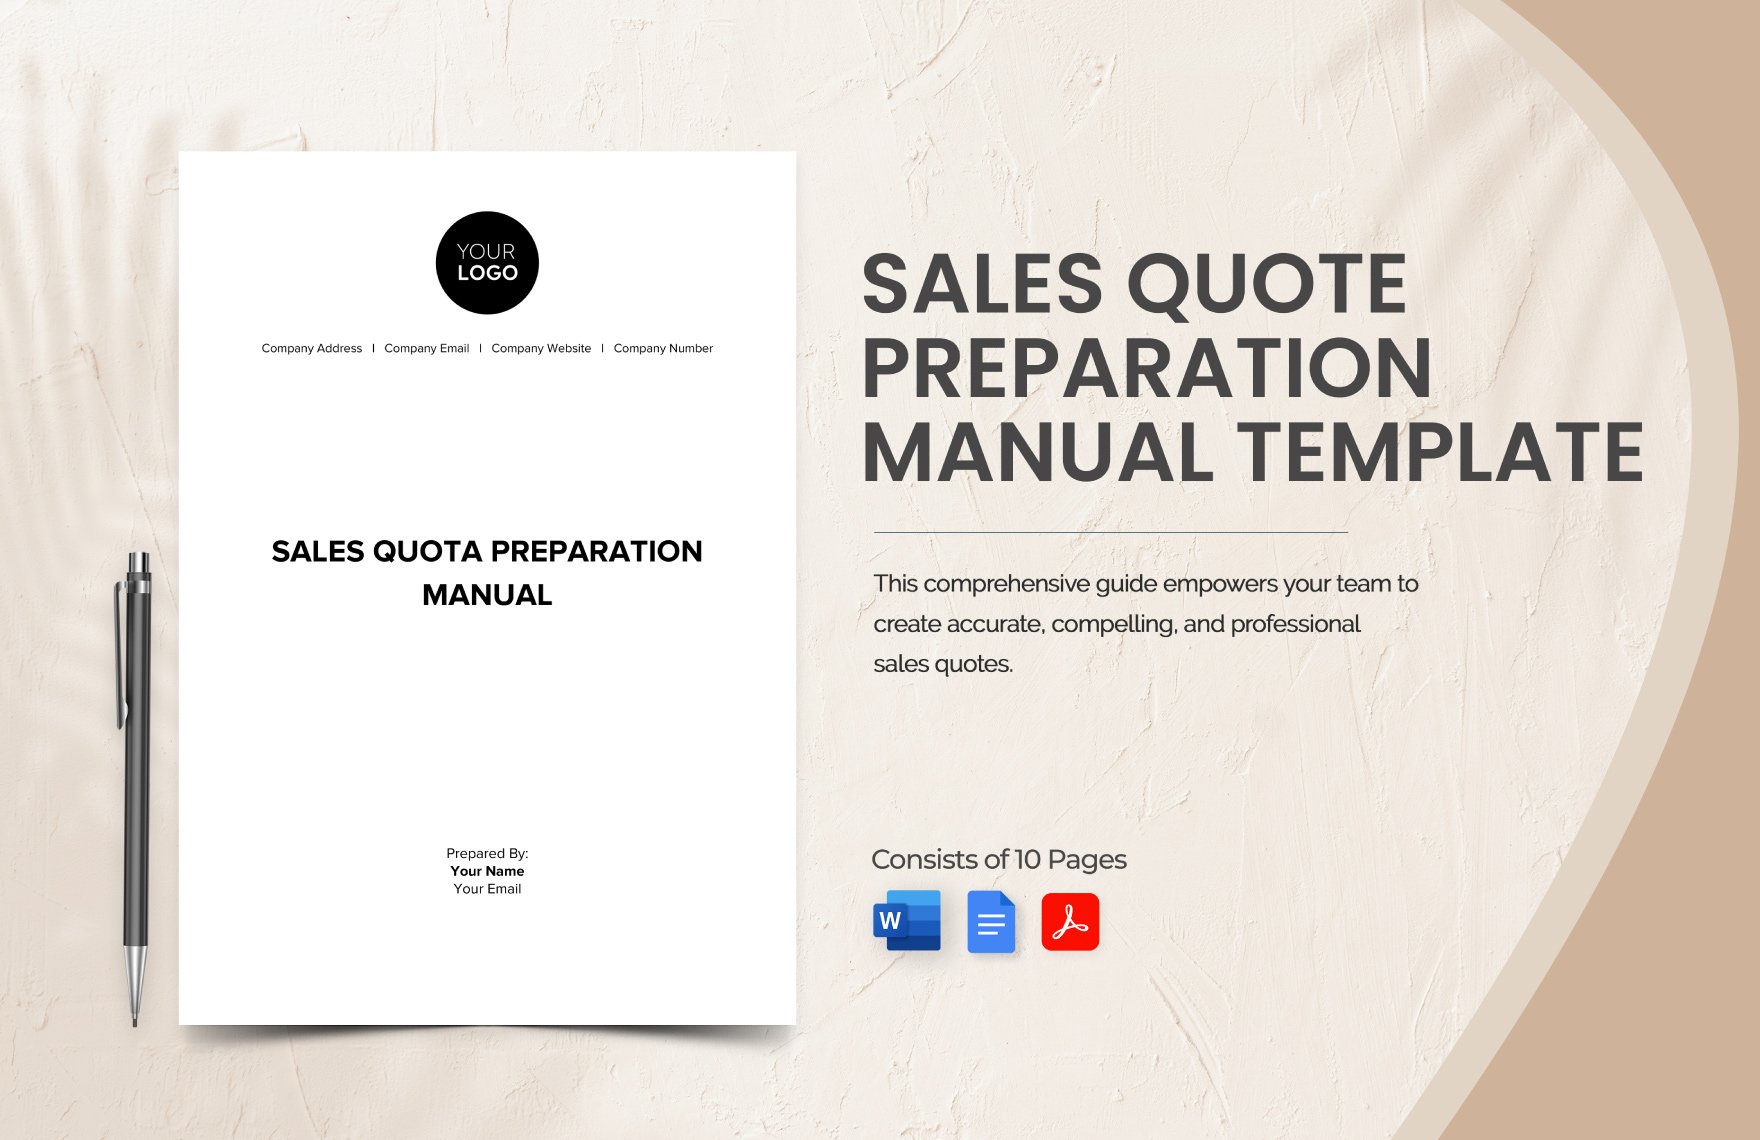 Sales Quote Preparation Manual Template in Word, Google Docs, PDF